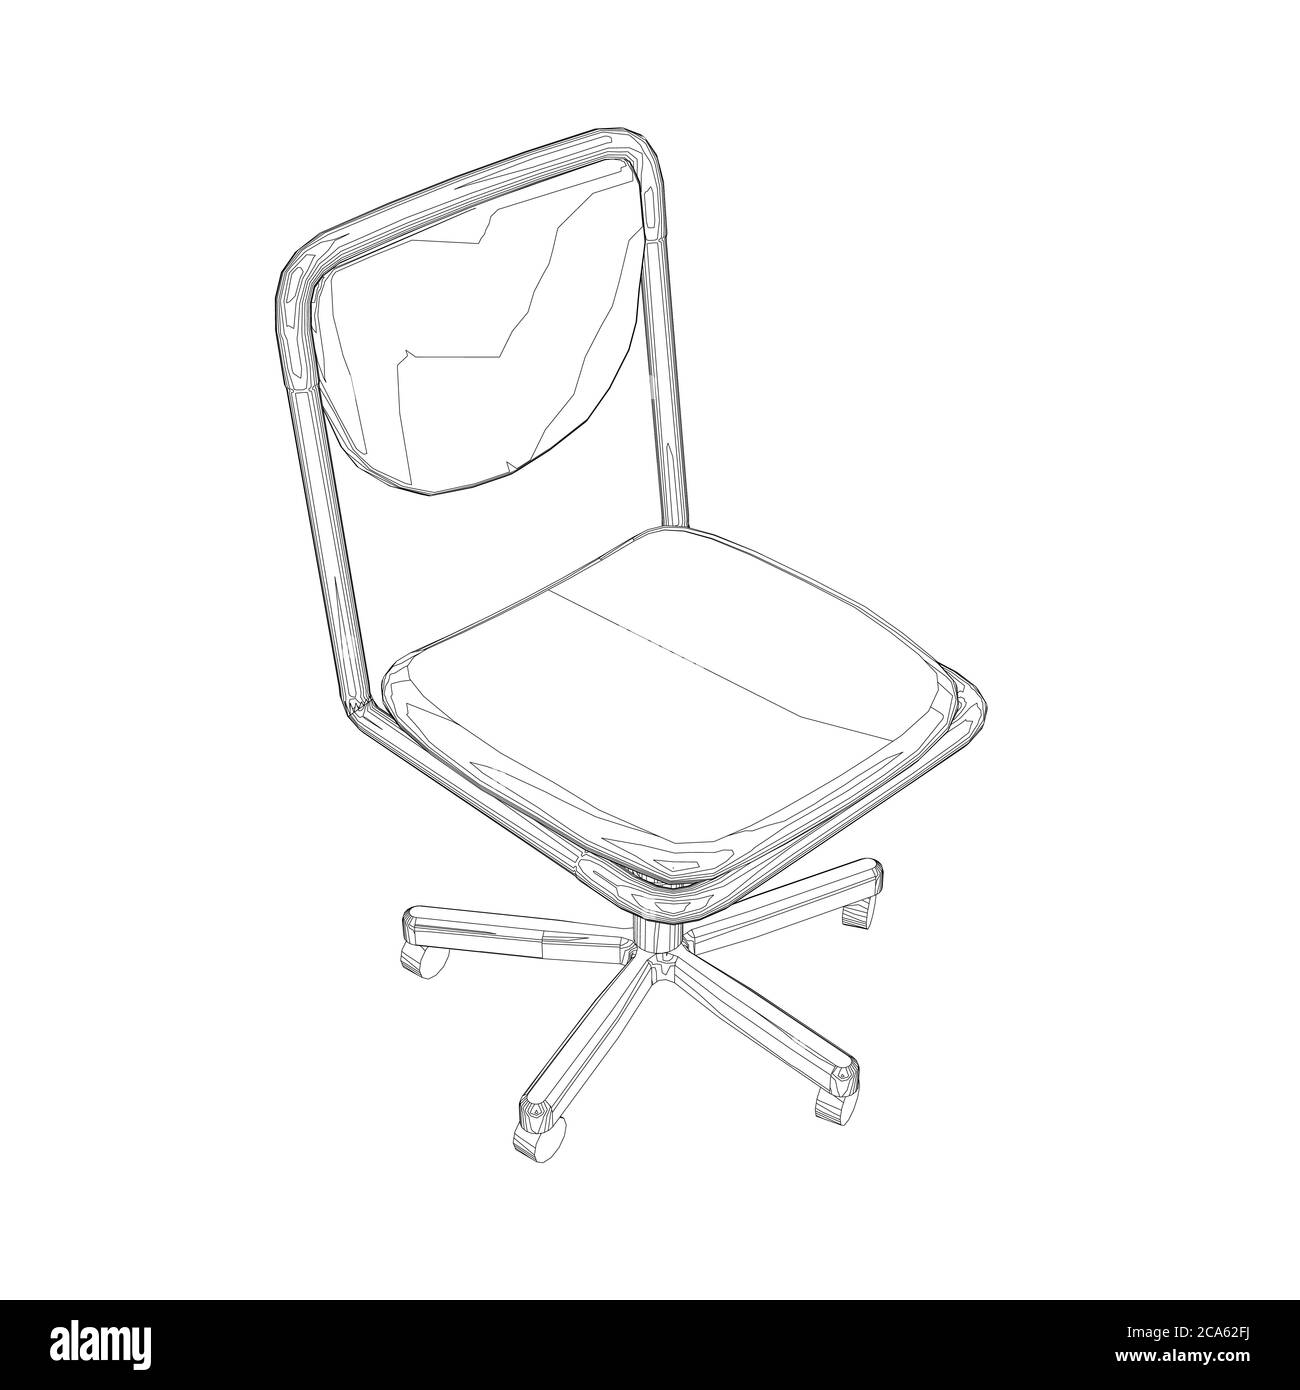 13731 Office Chair Sketch Images Stock Photos  Vectors  Shutterstock